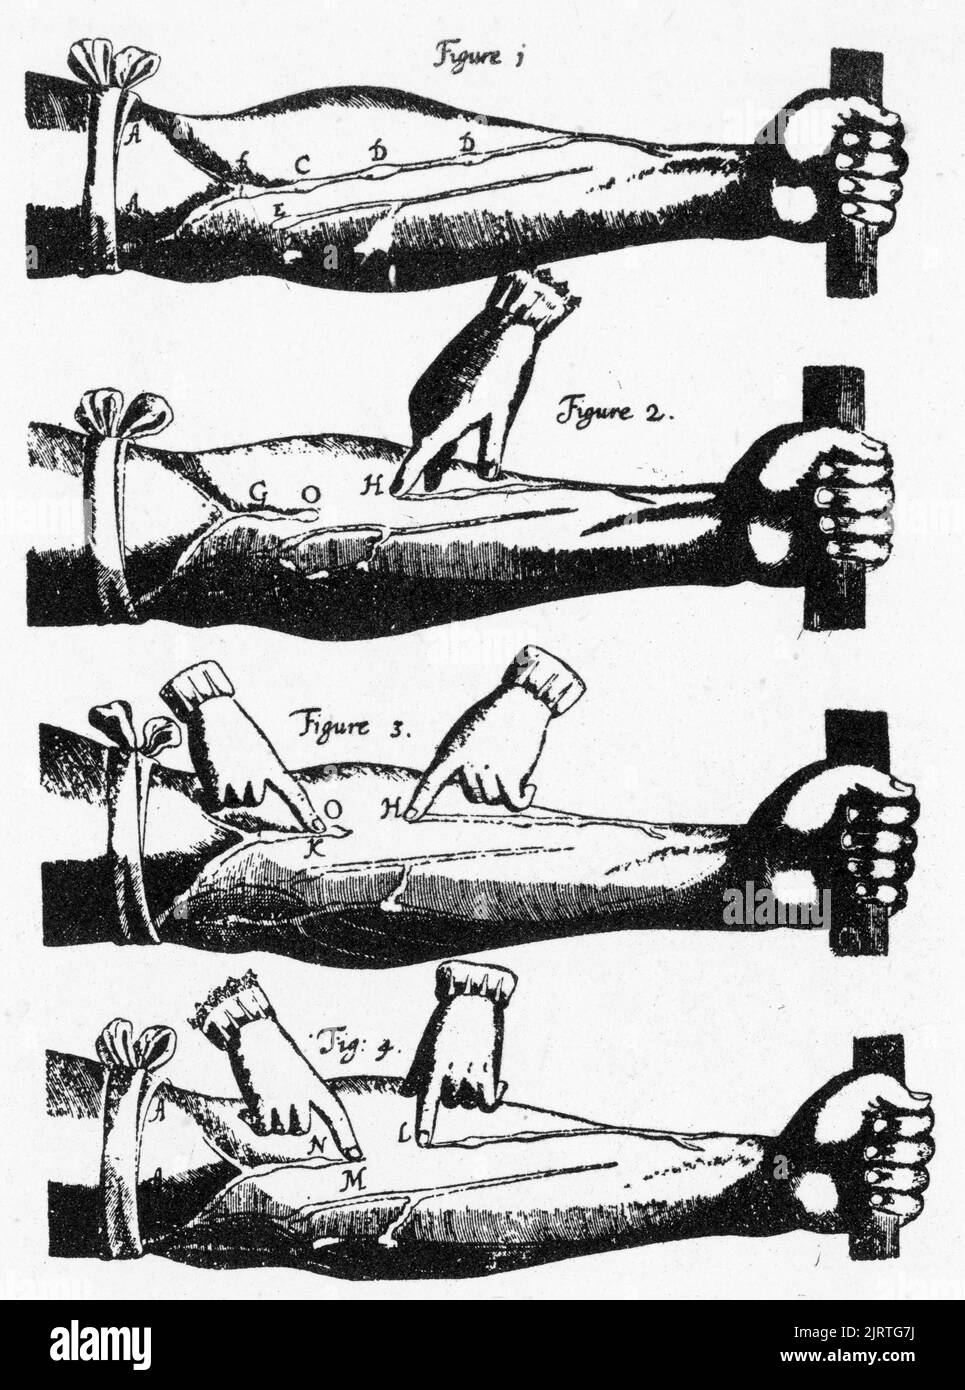 Diagrams illustrating William Harvey's experiments on a bandaged arm, 1628. Exercitatio Anatomica de Motu Cordis et Sanguinis in Animalibus (An Anatomical Exercise on the Motion of the Heart and Blood in Living Beings), commonly called De Motu Cordis, is the best-known work of the physician William Harvey (1578-1657), which was first published in 1628 and established the circulation of blood throughout the body. Stock Photo